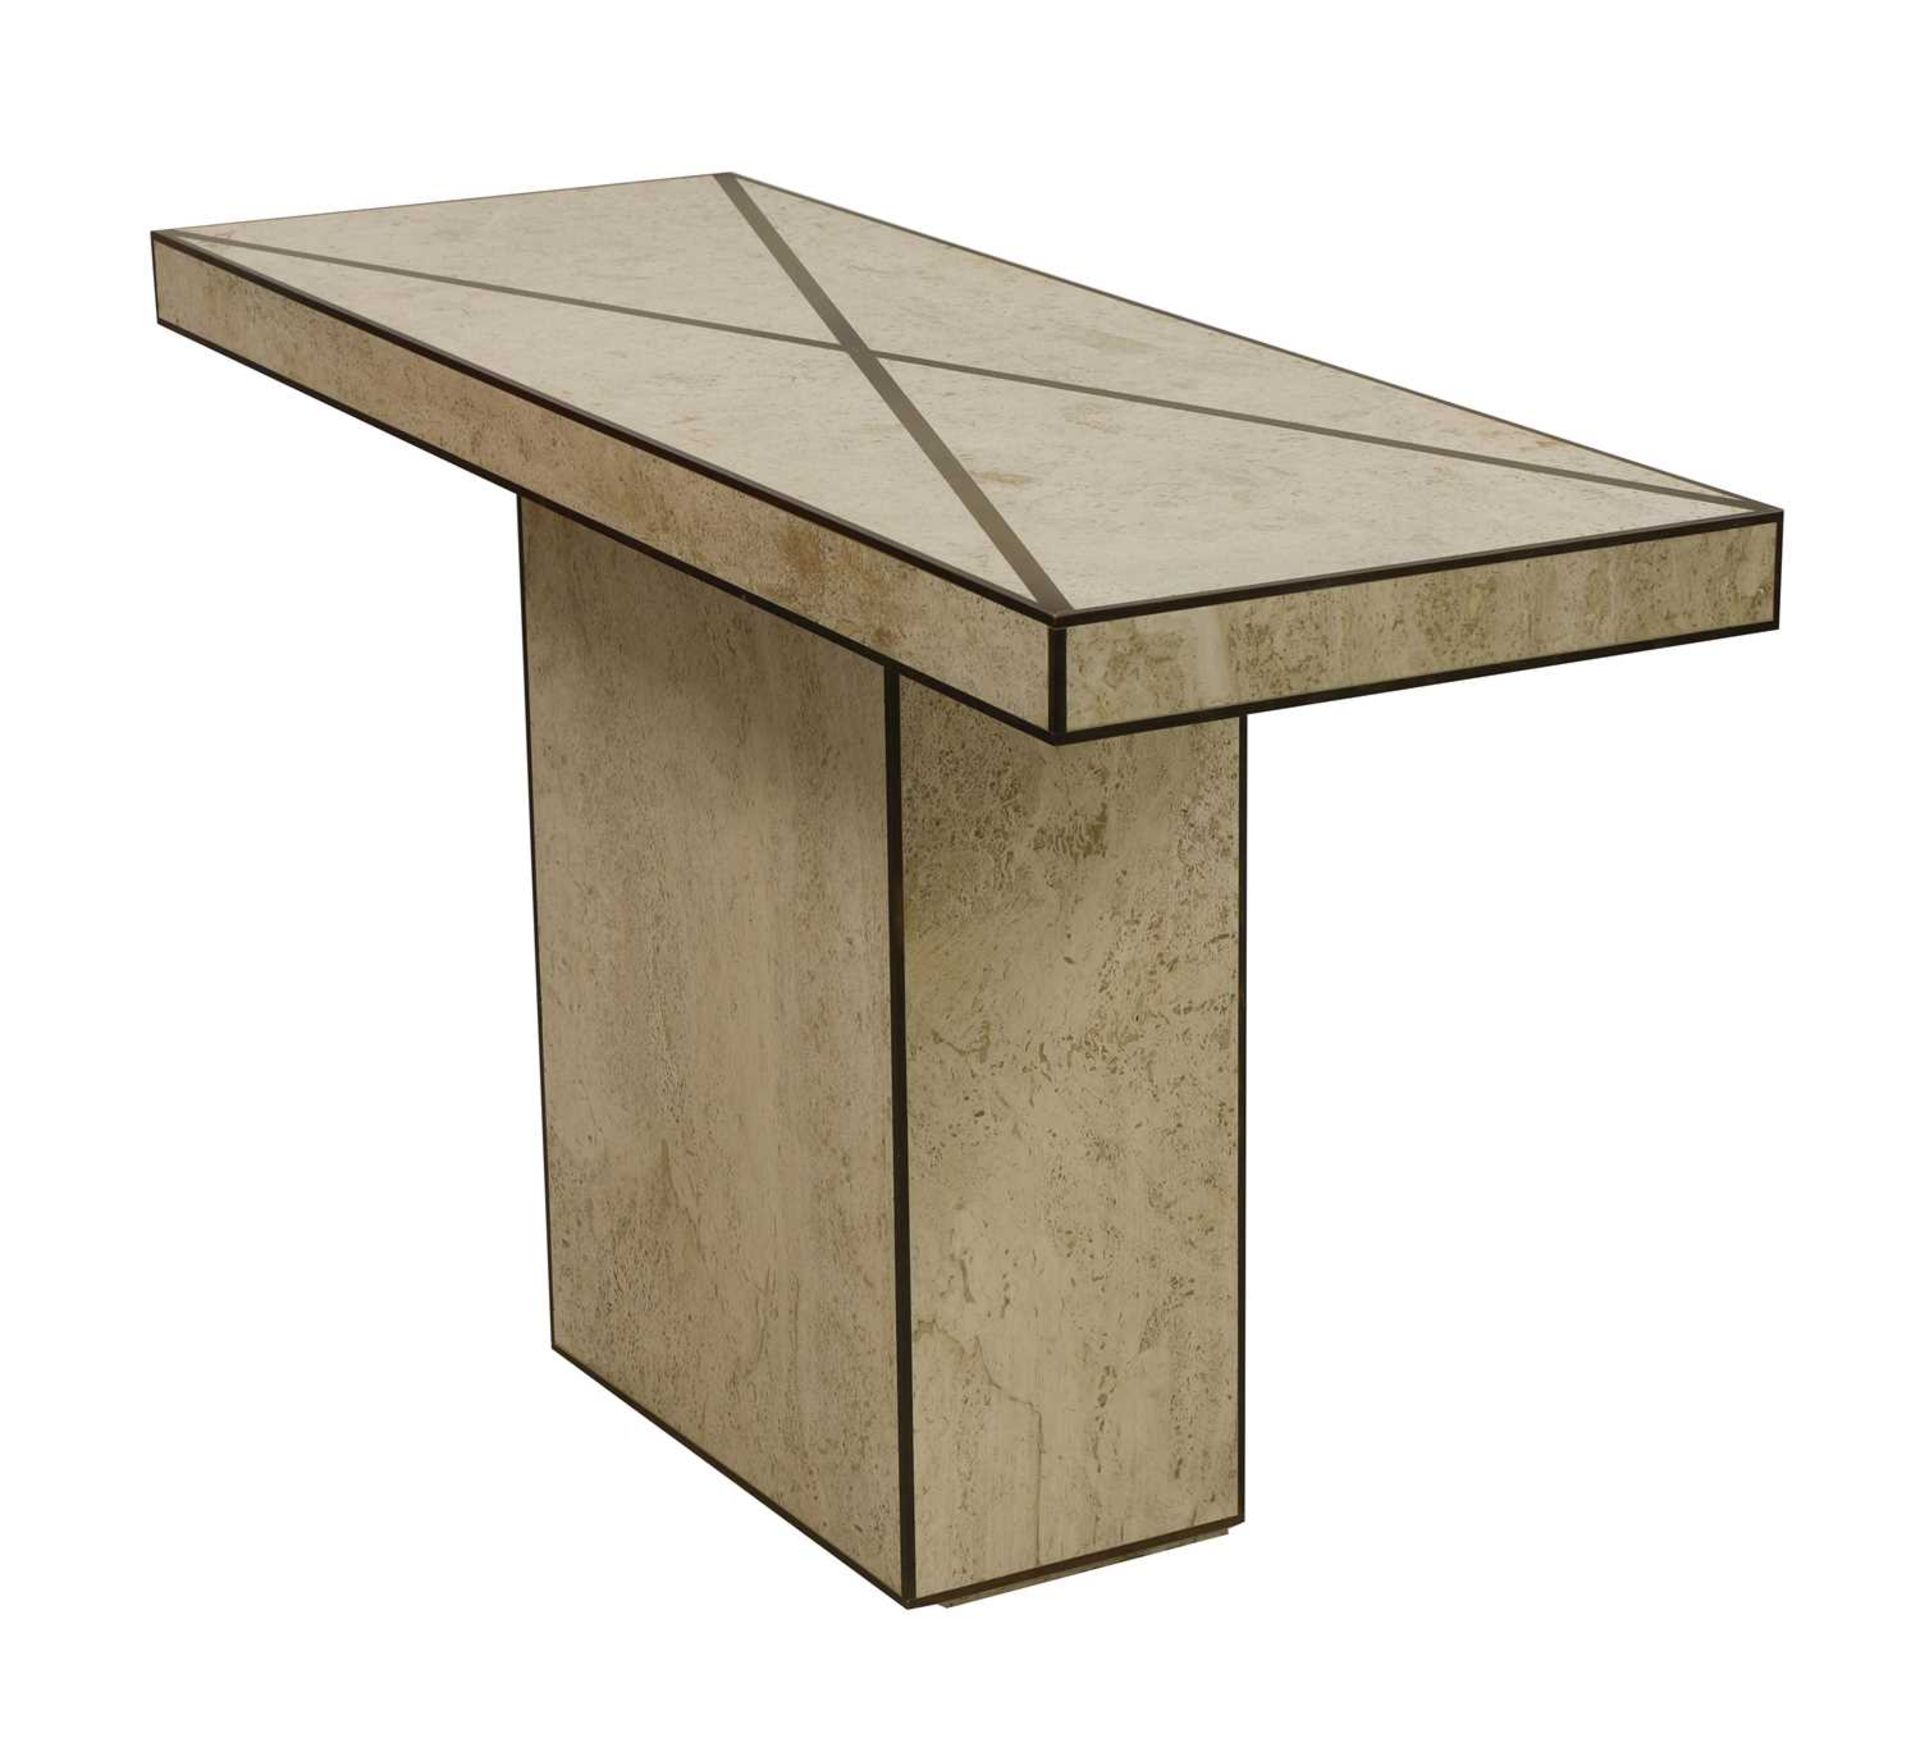 An Italian marble and travertine marble console table, - Image 2 of 3